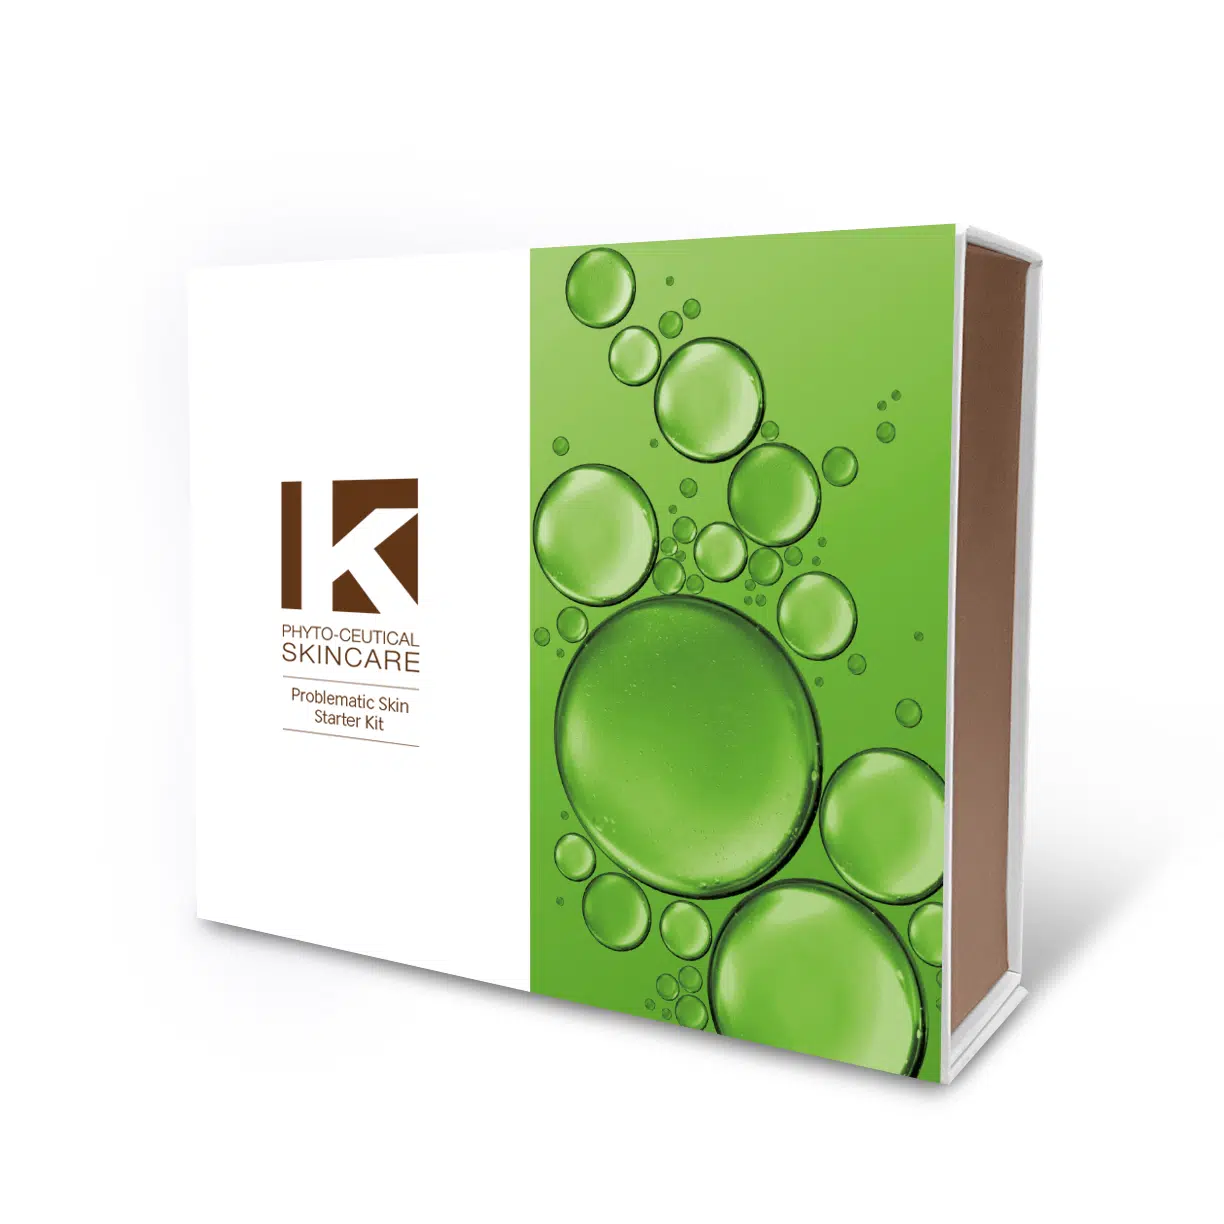 K Phyto-Ceutical Skincare - Problematic Skin Kit